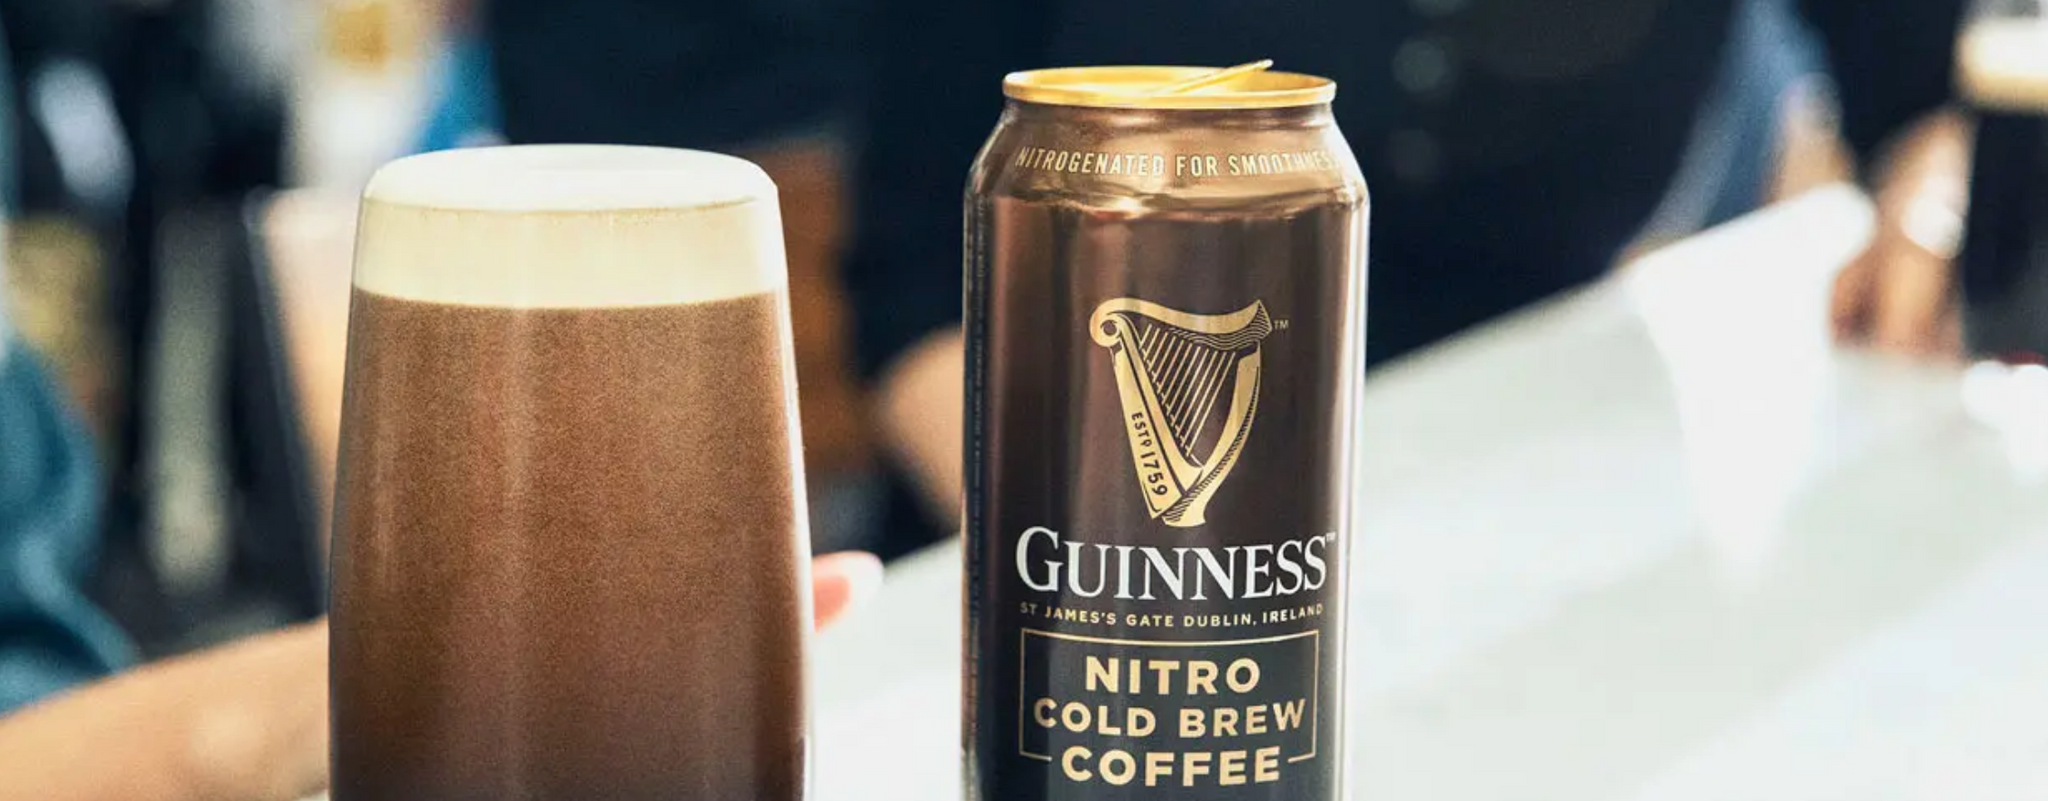 Guinness Cold Brew Coffee: stout with functional appeal